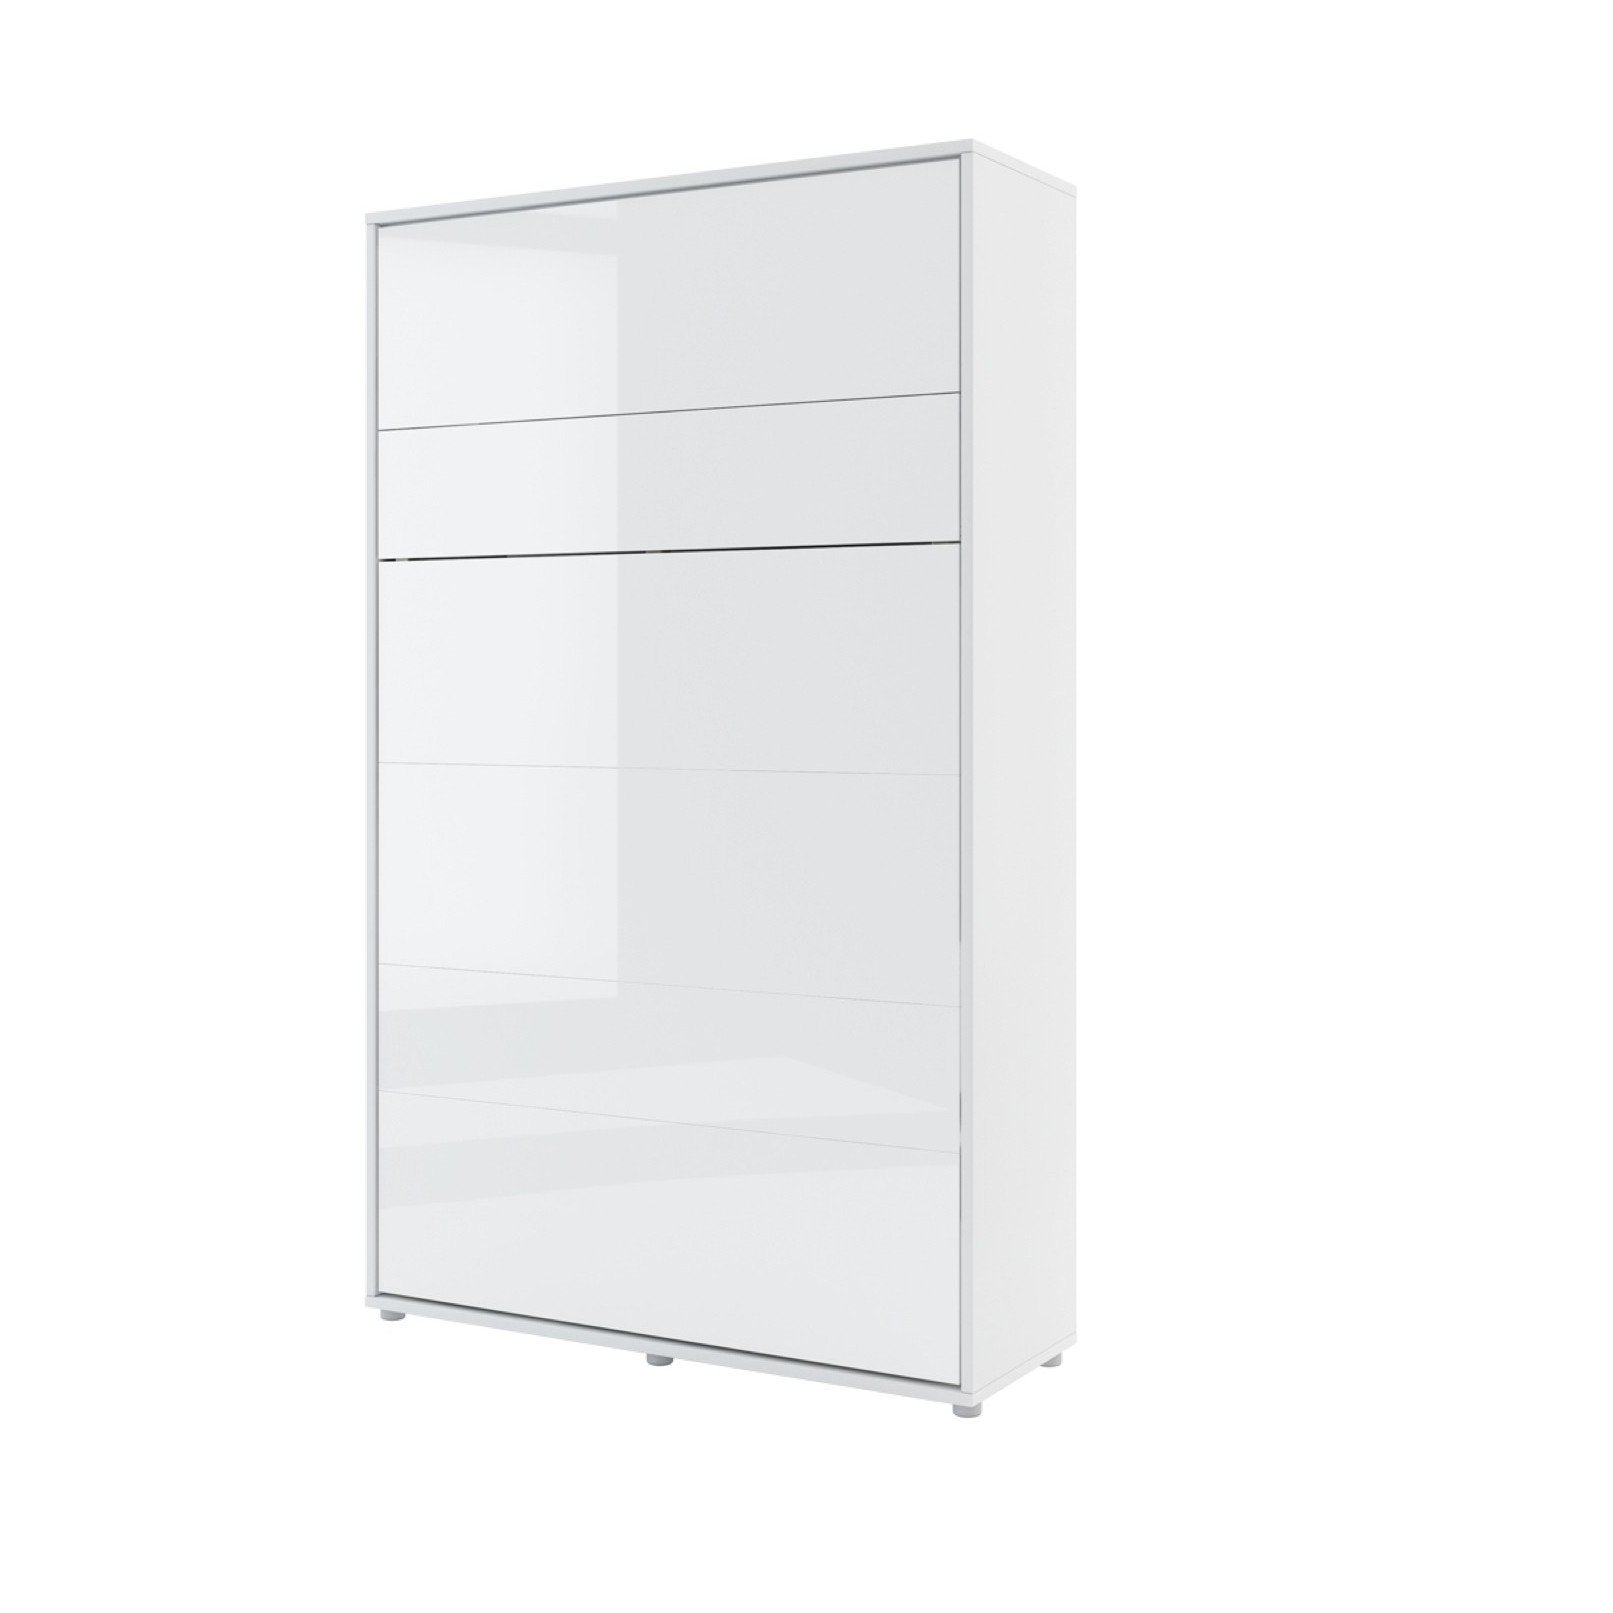 BC-02 Vertical Wall Bed Concept 120cm White Gloss Wall Bed 